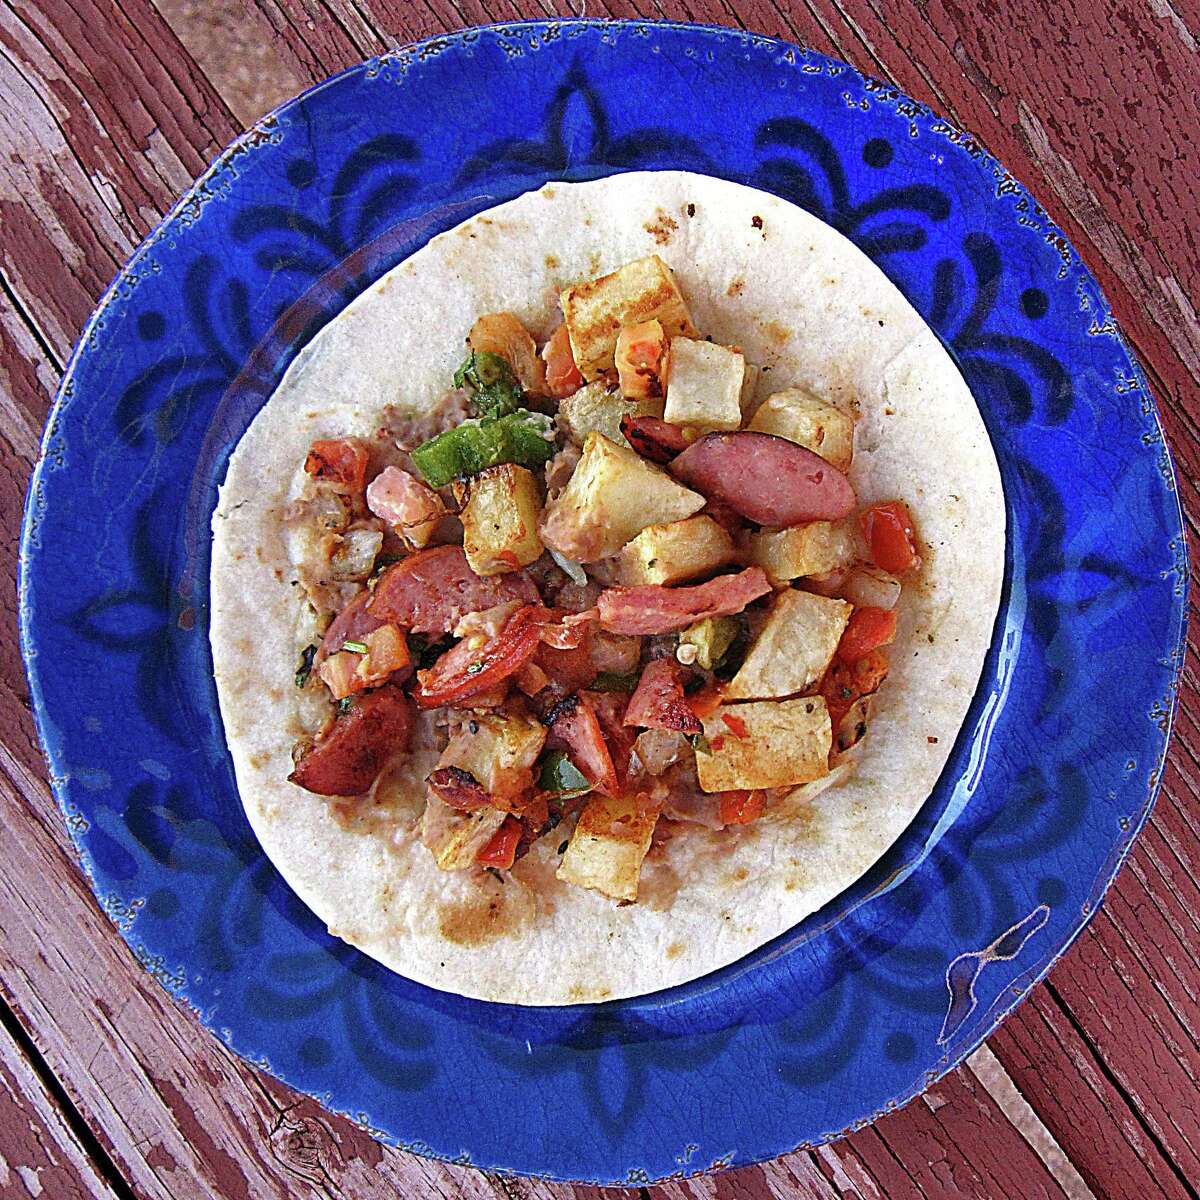 The Lalo taco with beans, country sausage, fried potatoes and pico de gallo on a handmade flour tortilla from El Toro Mexican Food.